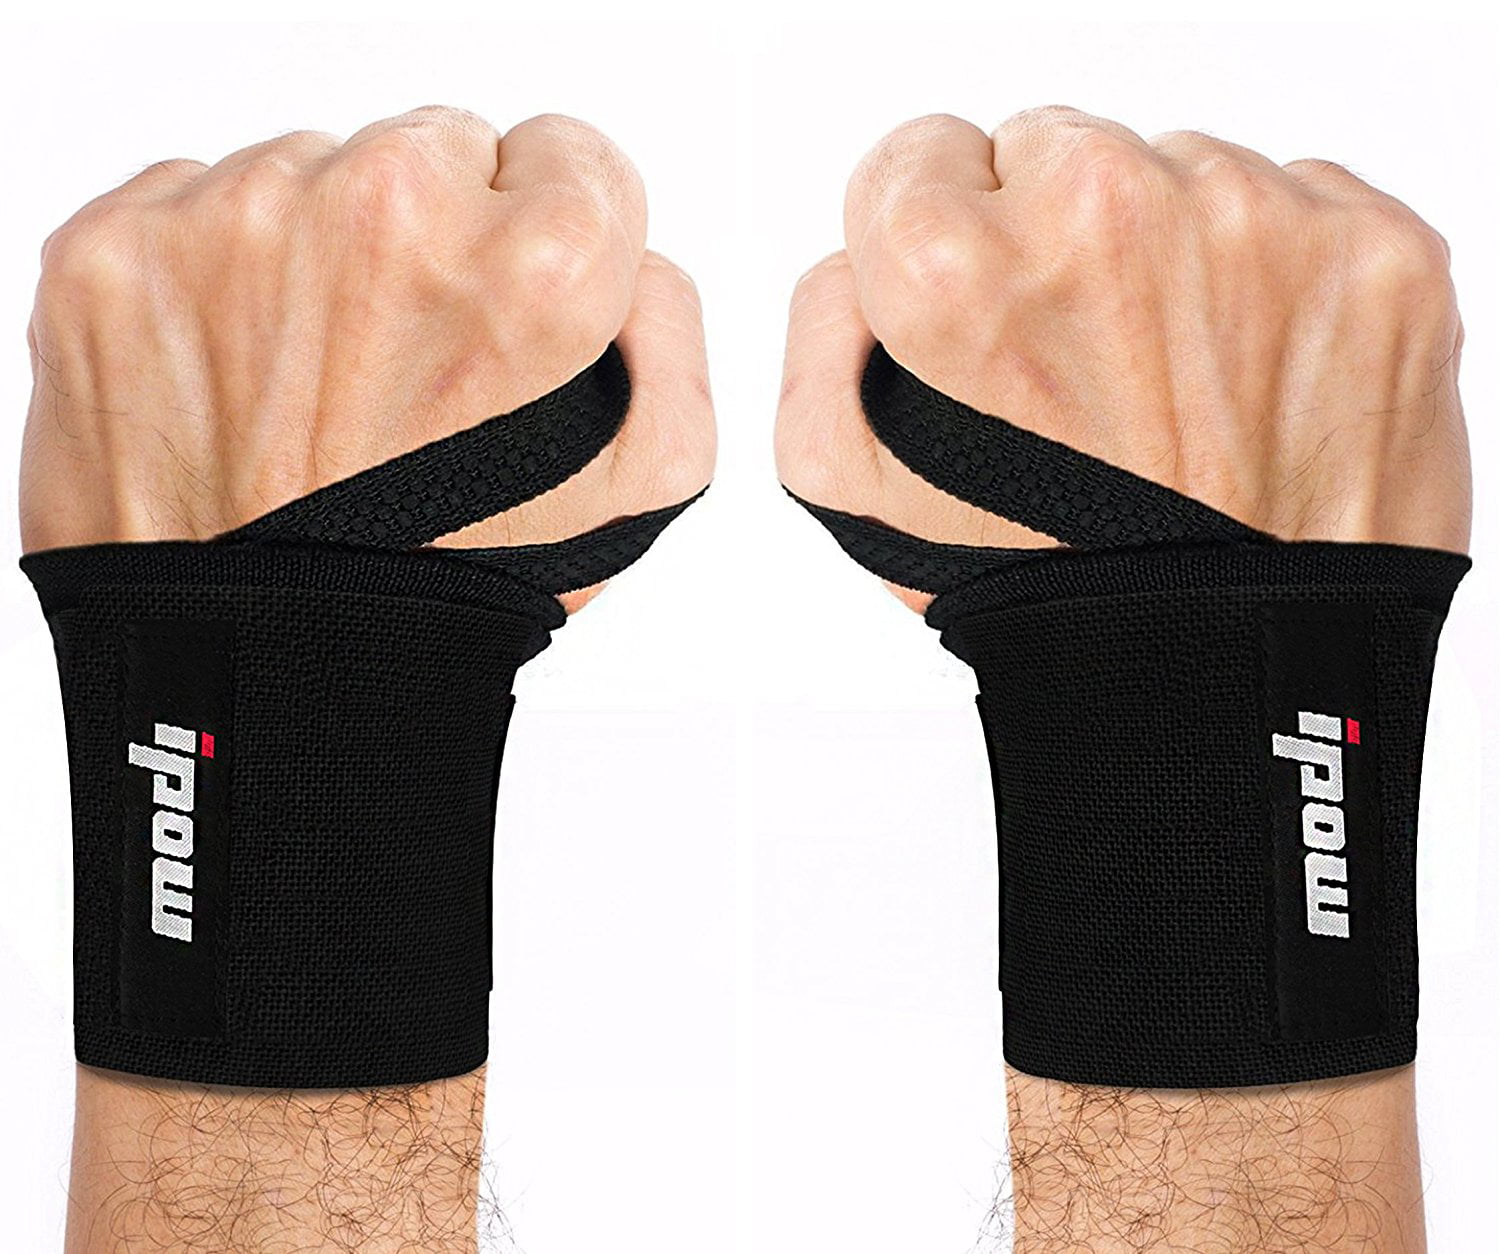 Weight Lifting Straps 2pcs Wrist support Heavy Strength Training Gym Support 